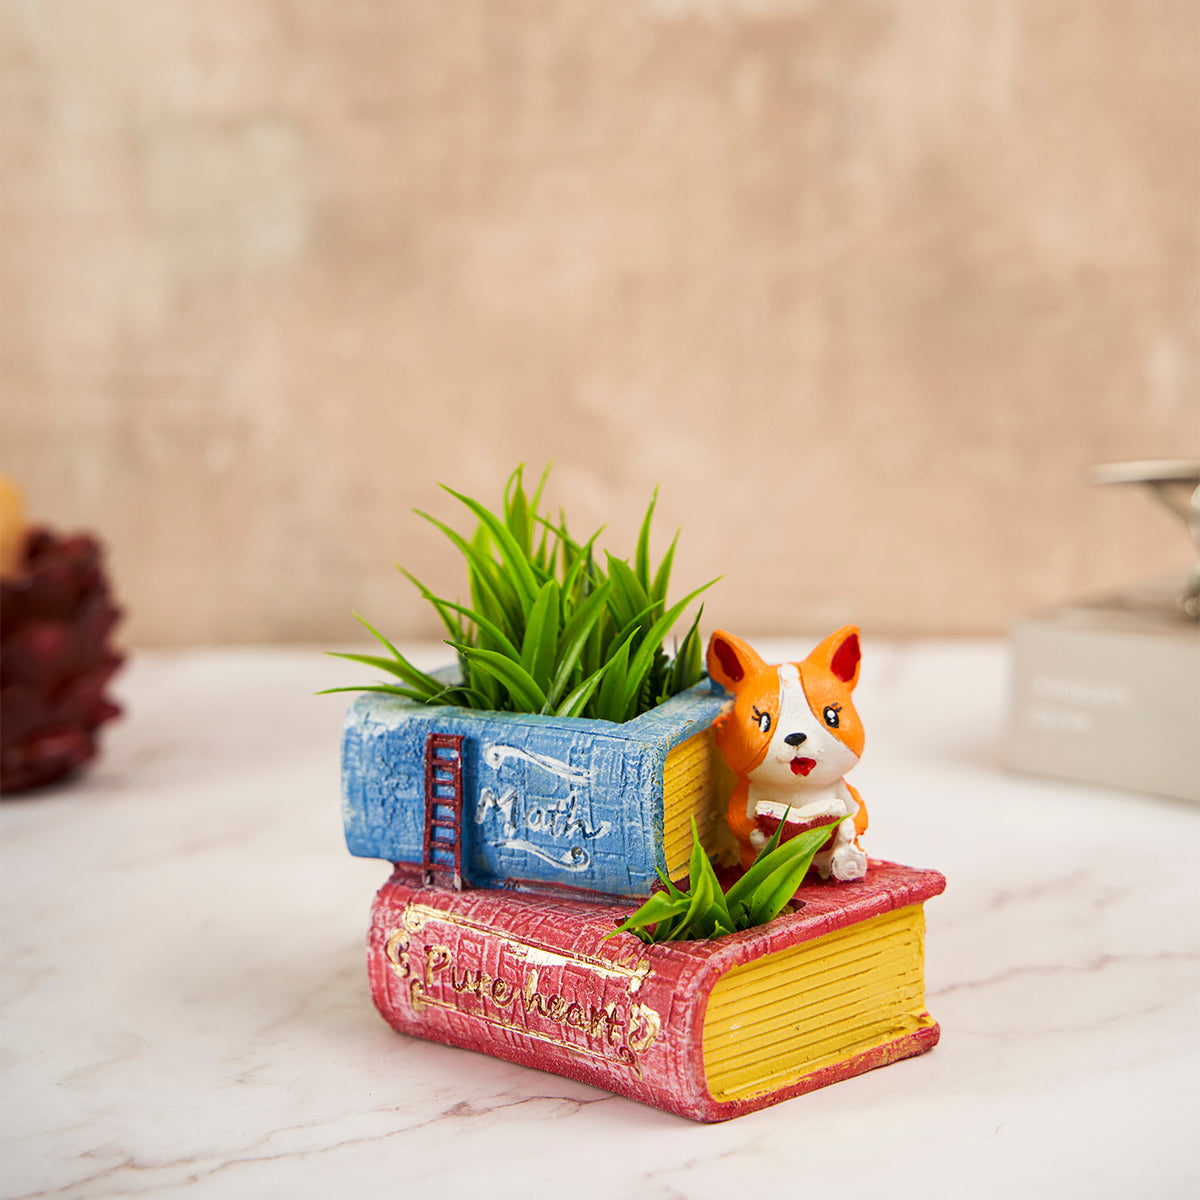 Handcrafted Puppy With Book Succulent Planter For  Home Garden Office Desktop